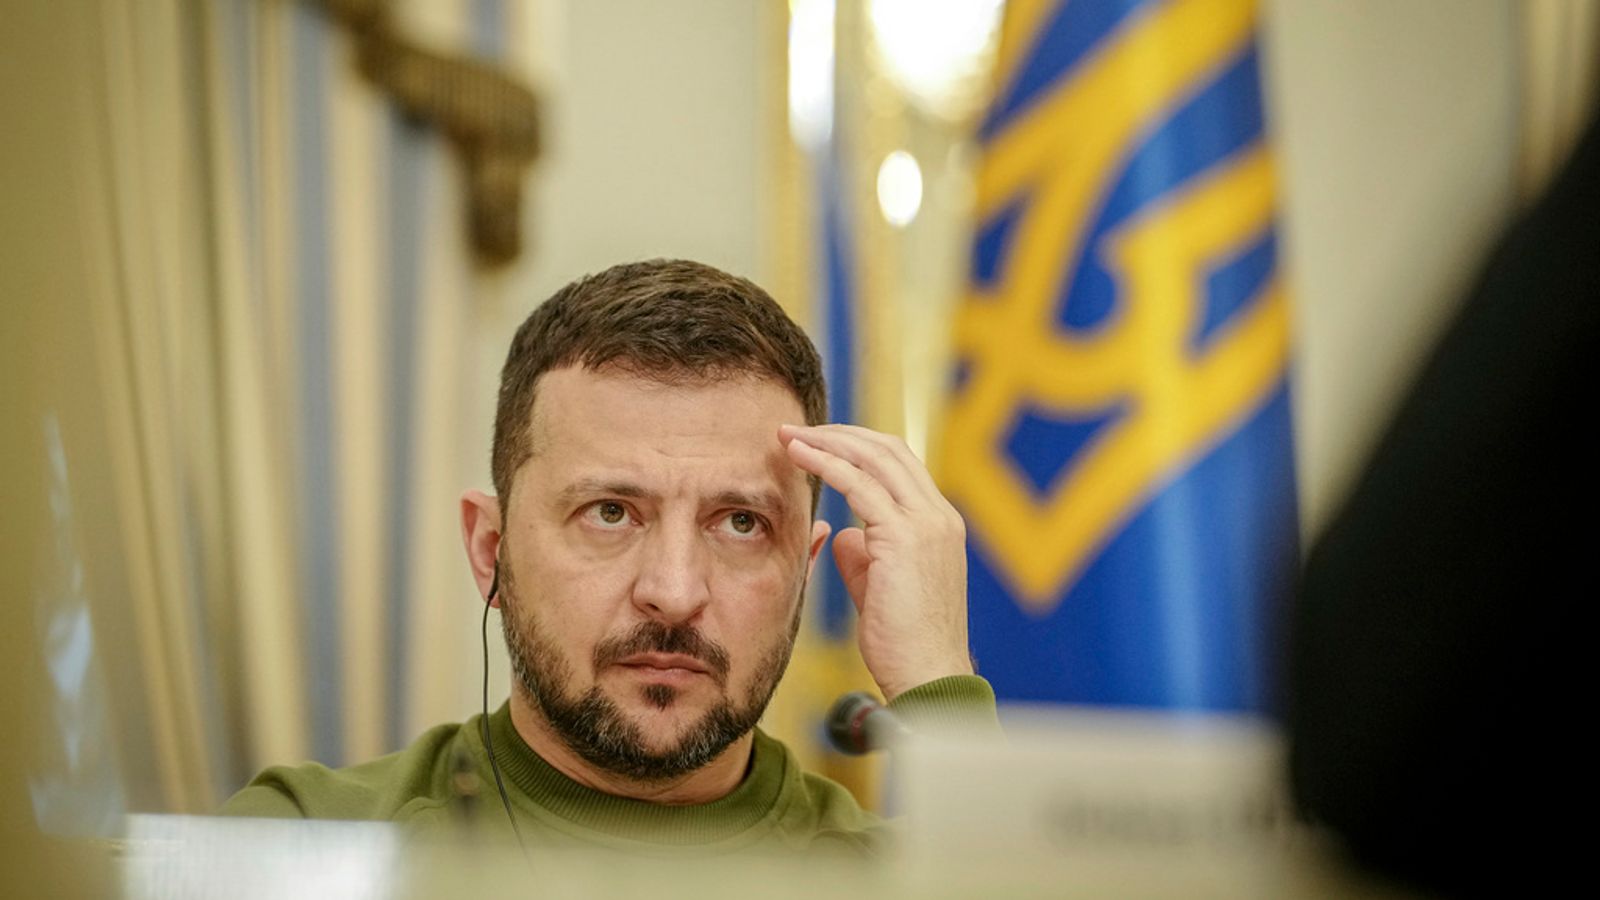 Ukraine war: Zelenskyy cancels all foreign trips - as Russian troops 'partially pushed back'